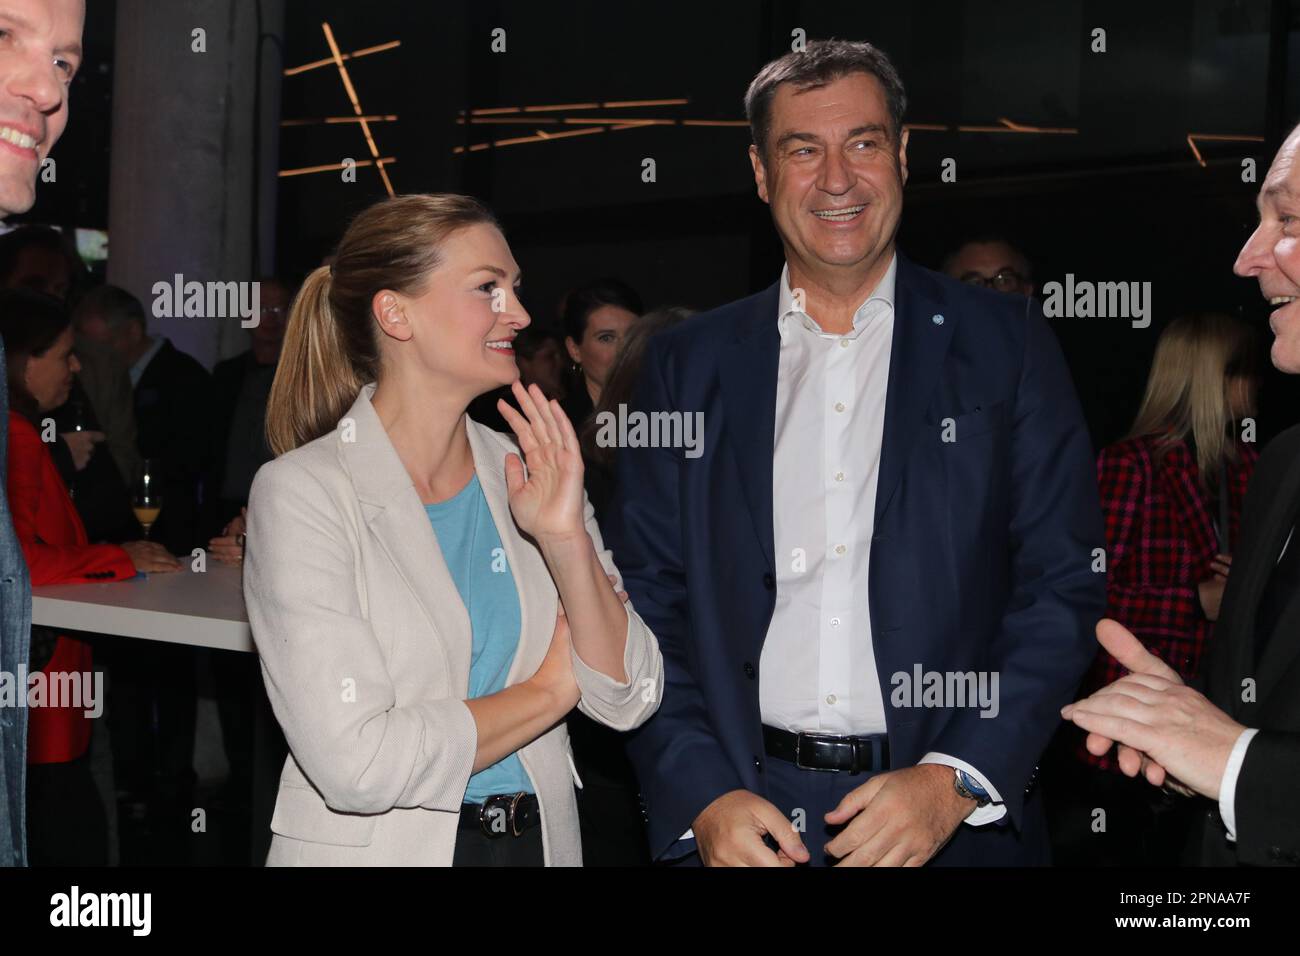 Munich, Germany . 17th Apr, 2023. Munich, Germany, 17. April 2023; Judith GERLACH, Minister of State for digital development and Dr. Markus SOEDER, SÖDER, Bayerischer Ministerpräsident, German politician serving as Minister-President of Bavaria since 2018 and Leader of the Christian Social Union in Bavaria (CSU), seen during the VIP Opening at the DISNEY 100 Exhibition entertainment event held at the small Olympia hall in Munich Germany on 17. April 2023. picture and copyright Arthur THILL/ATP images (THILL Arthur/ATP/SPP) Credit: SPP Sport Press Photo. /Alamy Live News Stock Photo